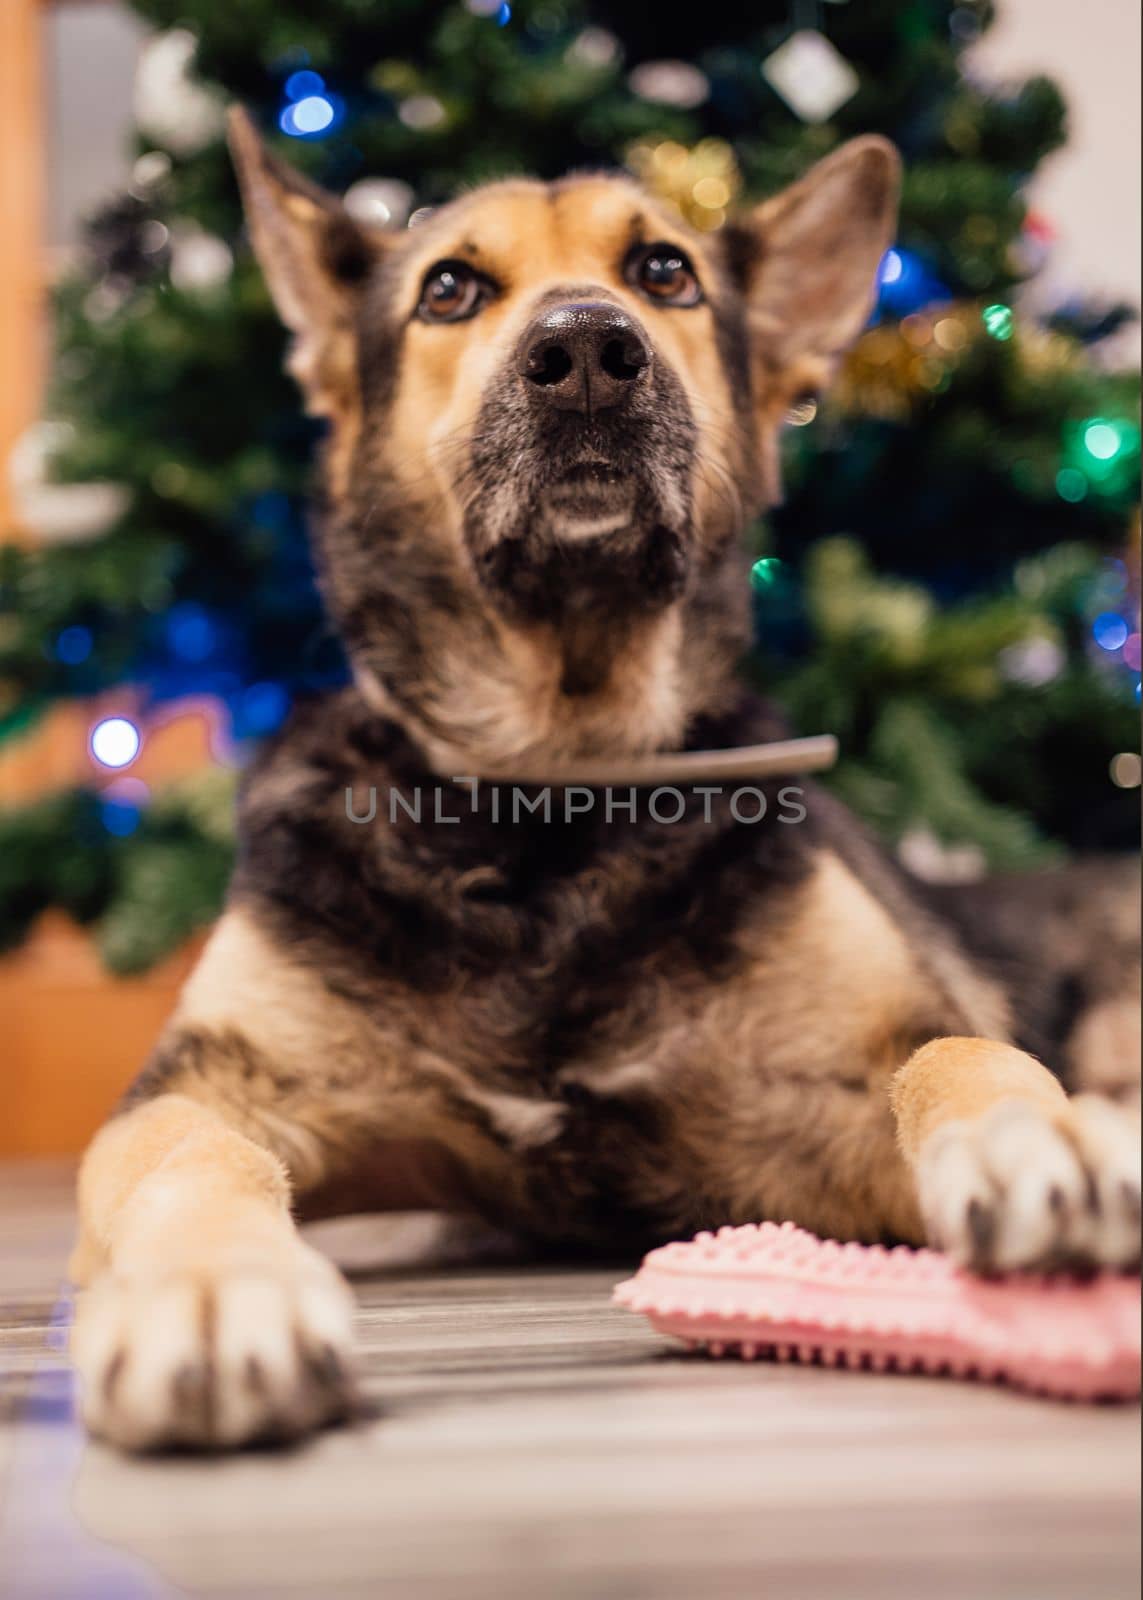 Funny dog female posing in christmas setting protecting her pink toy bone.